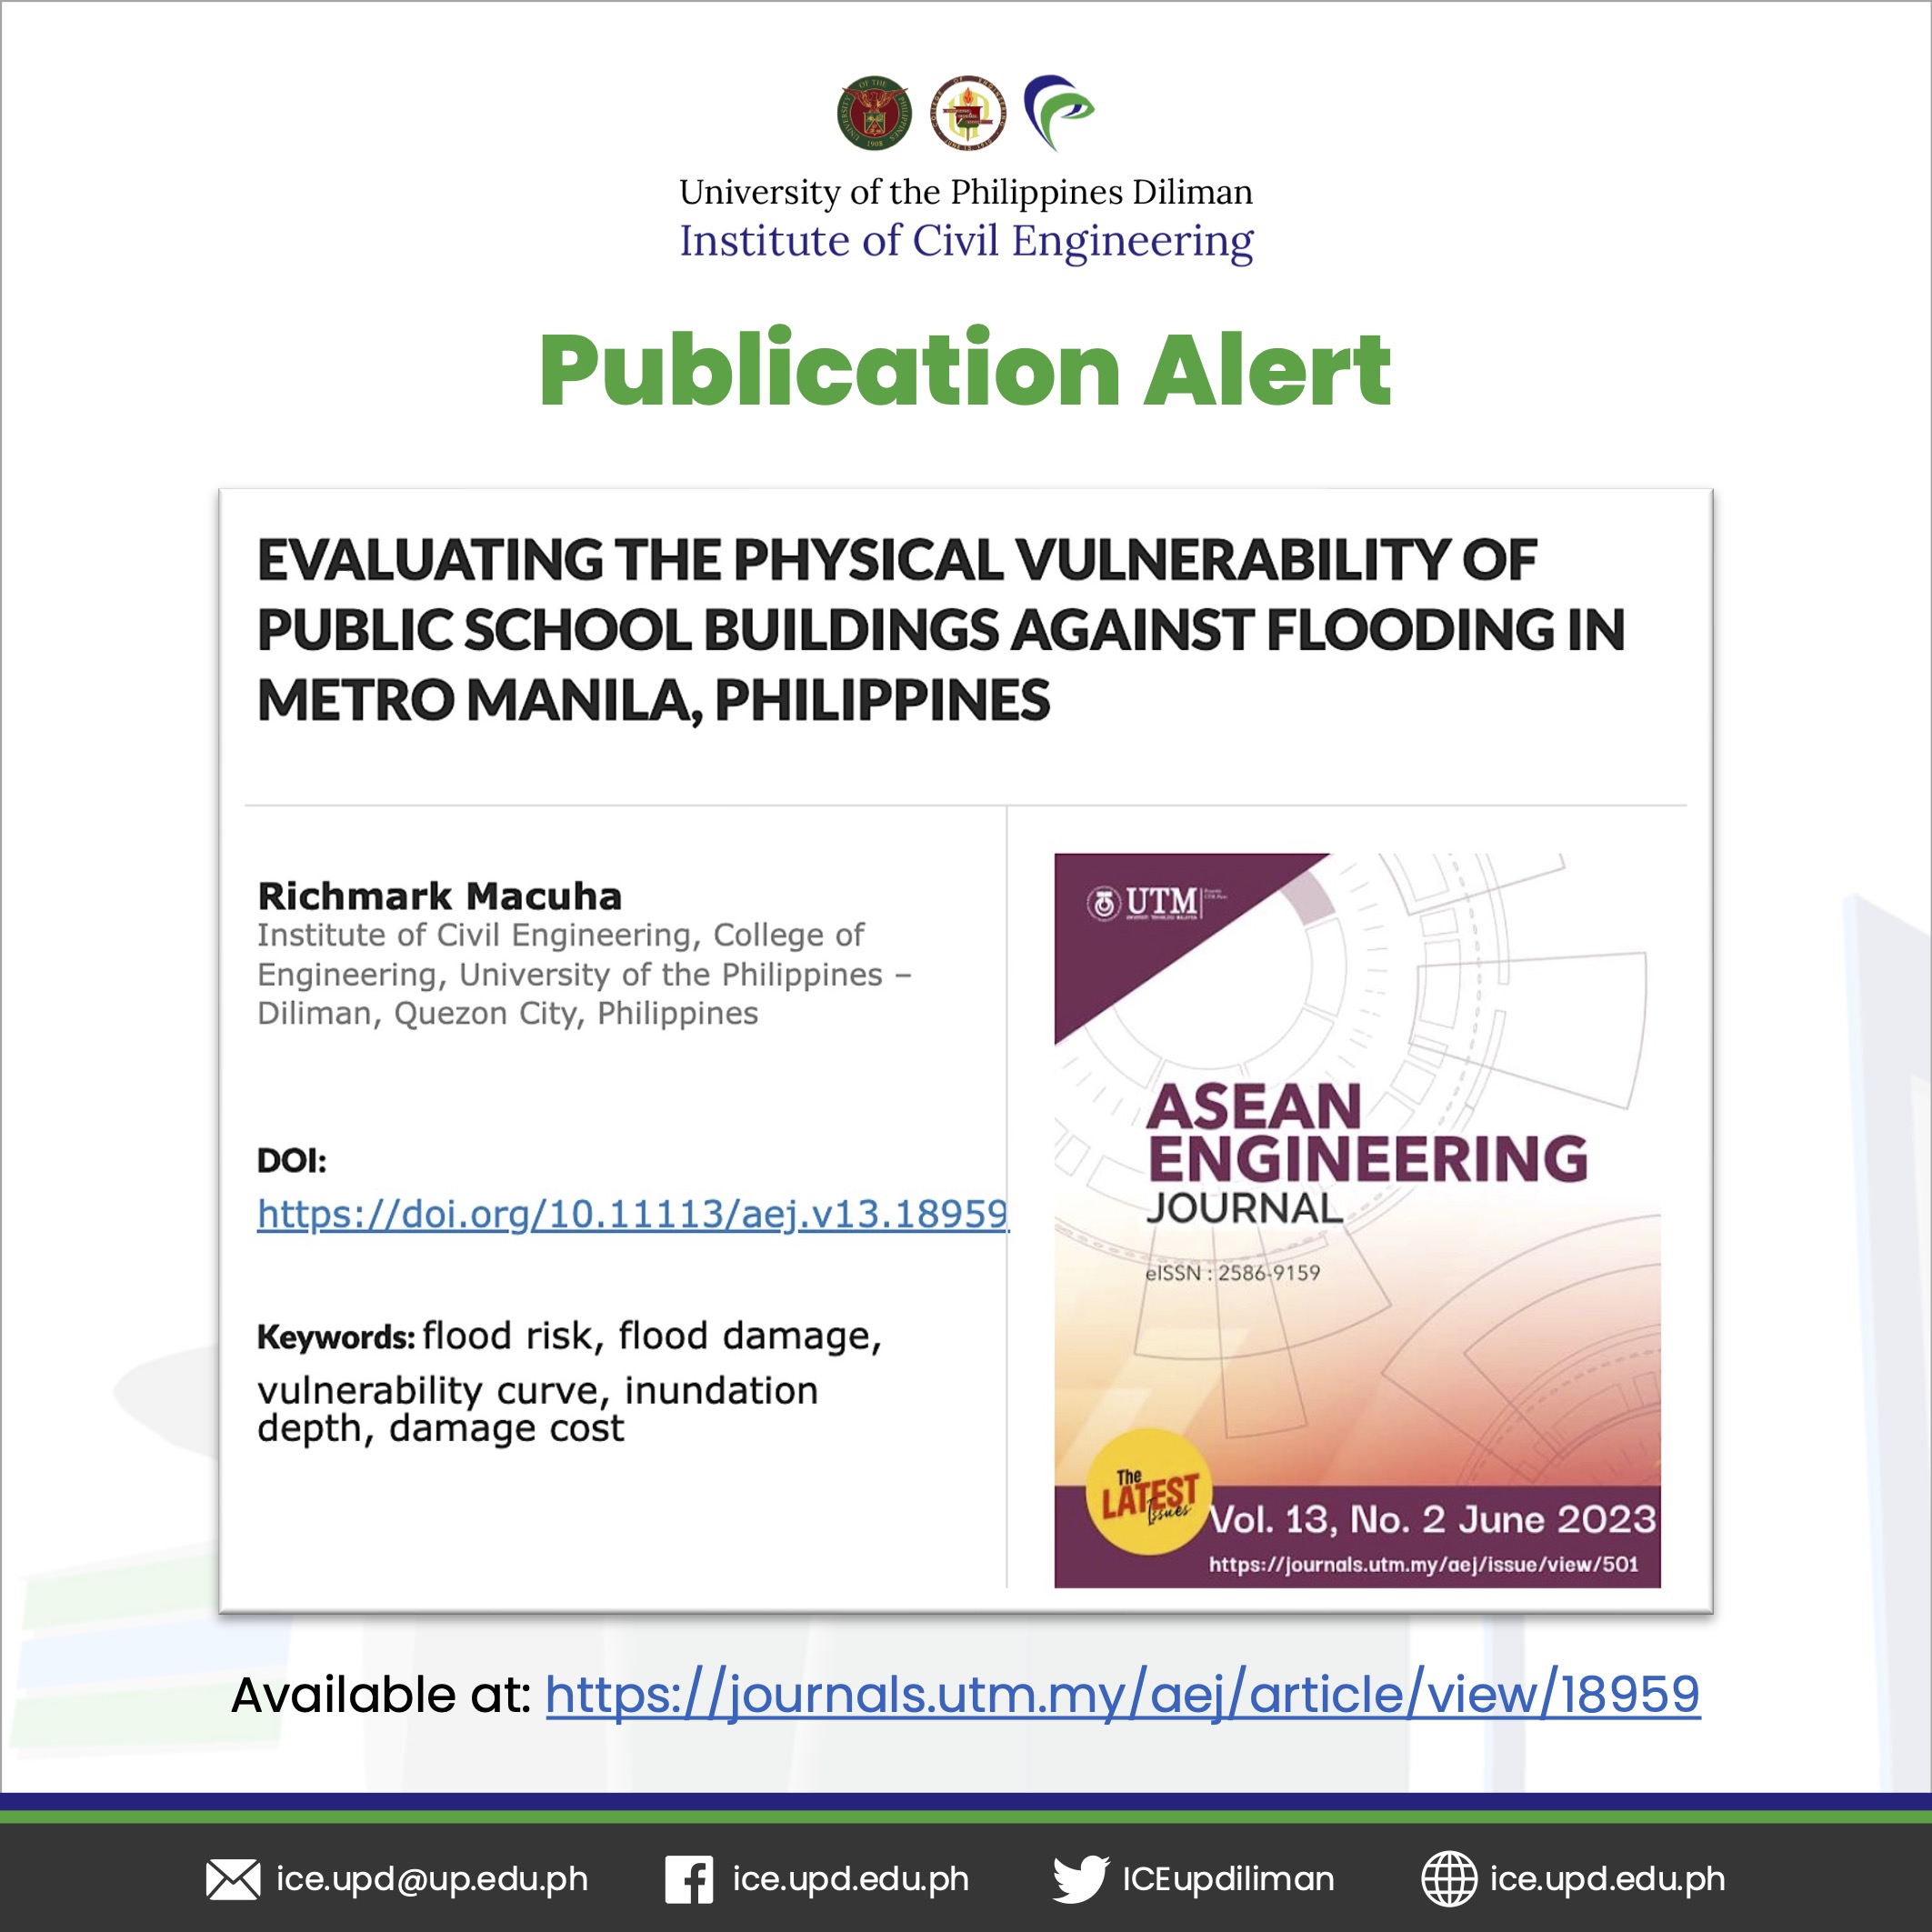 Publication Alert: Evaluating the Physical Vulnerability of Public School Buildings against Flooding in Metro Manila, Philippines